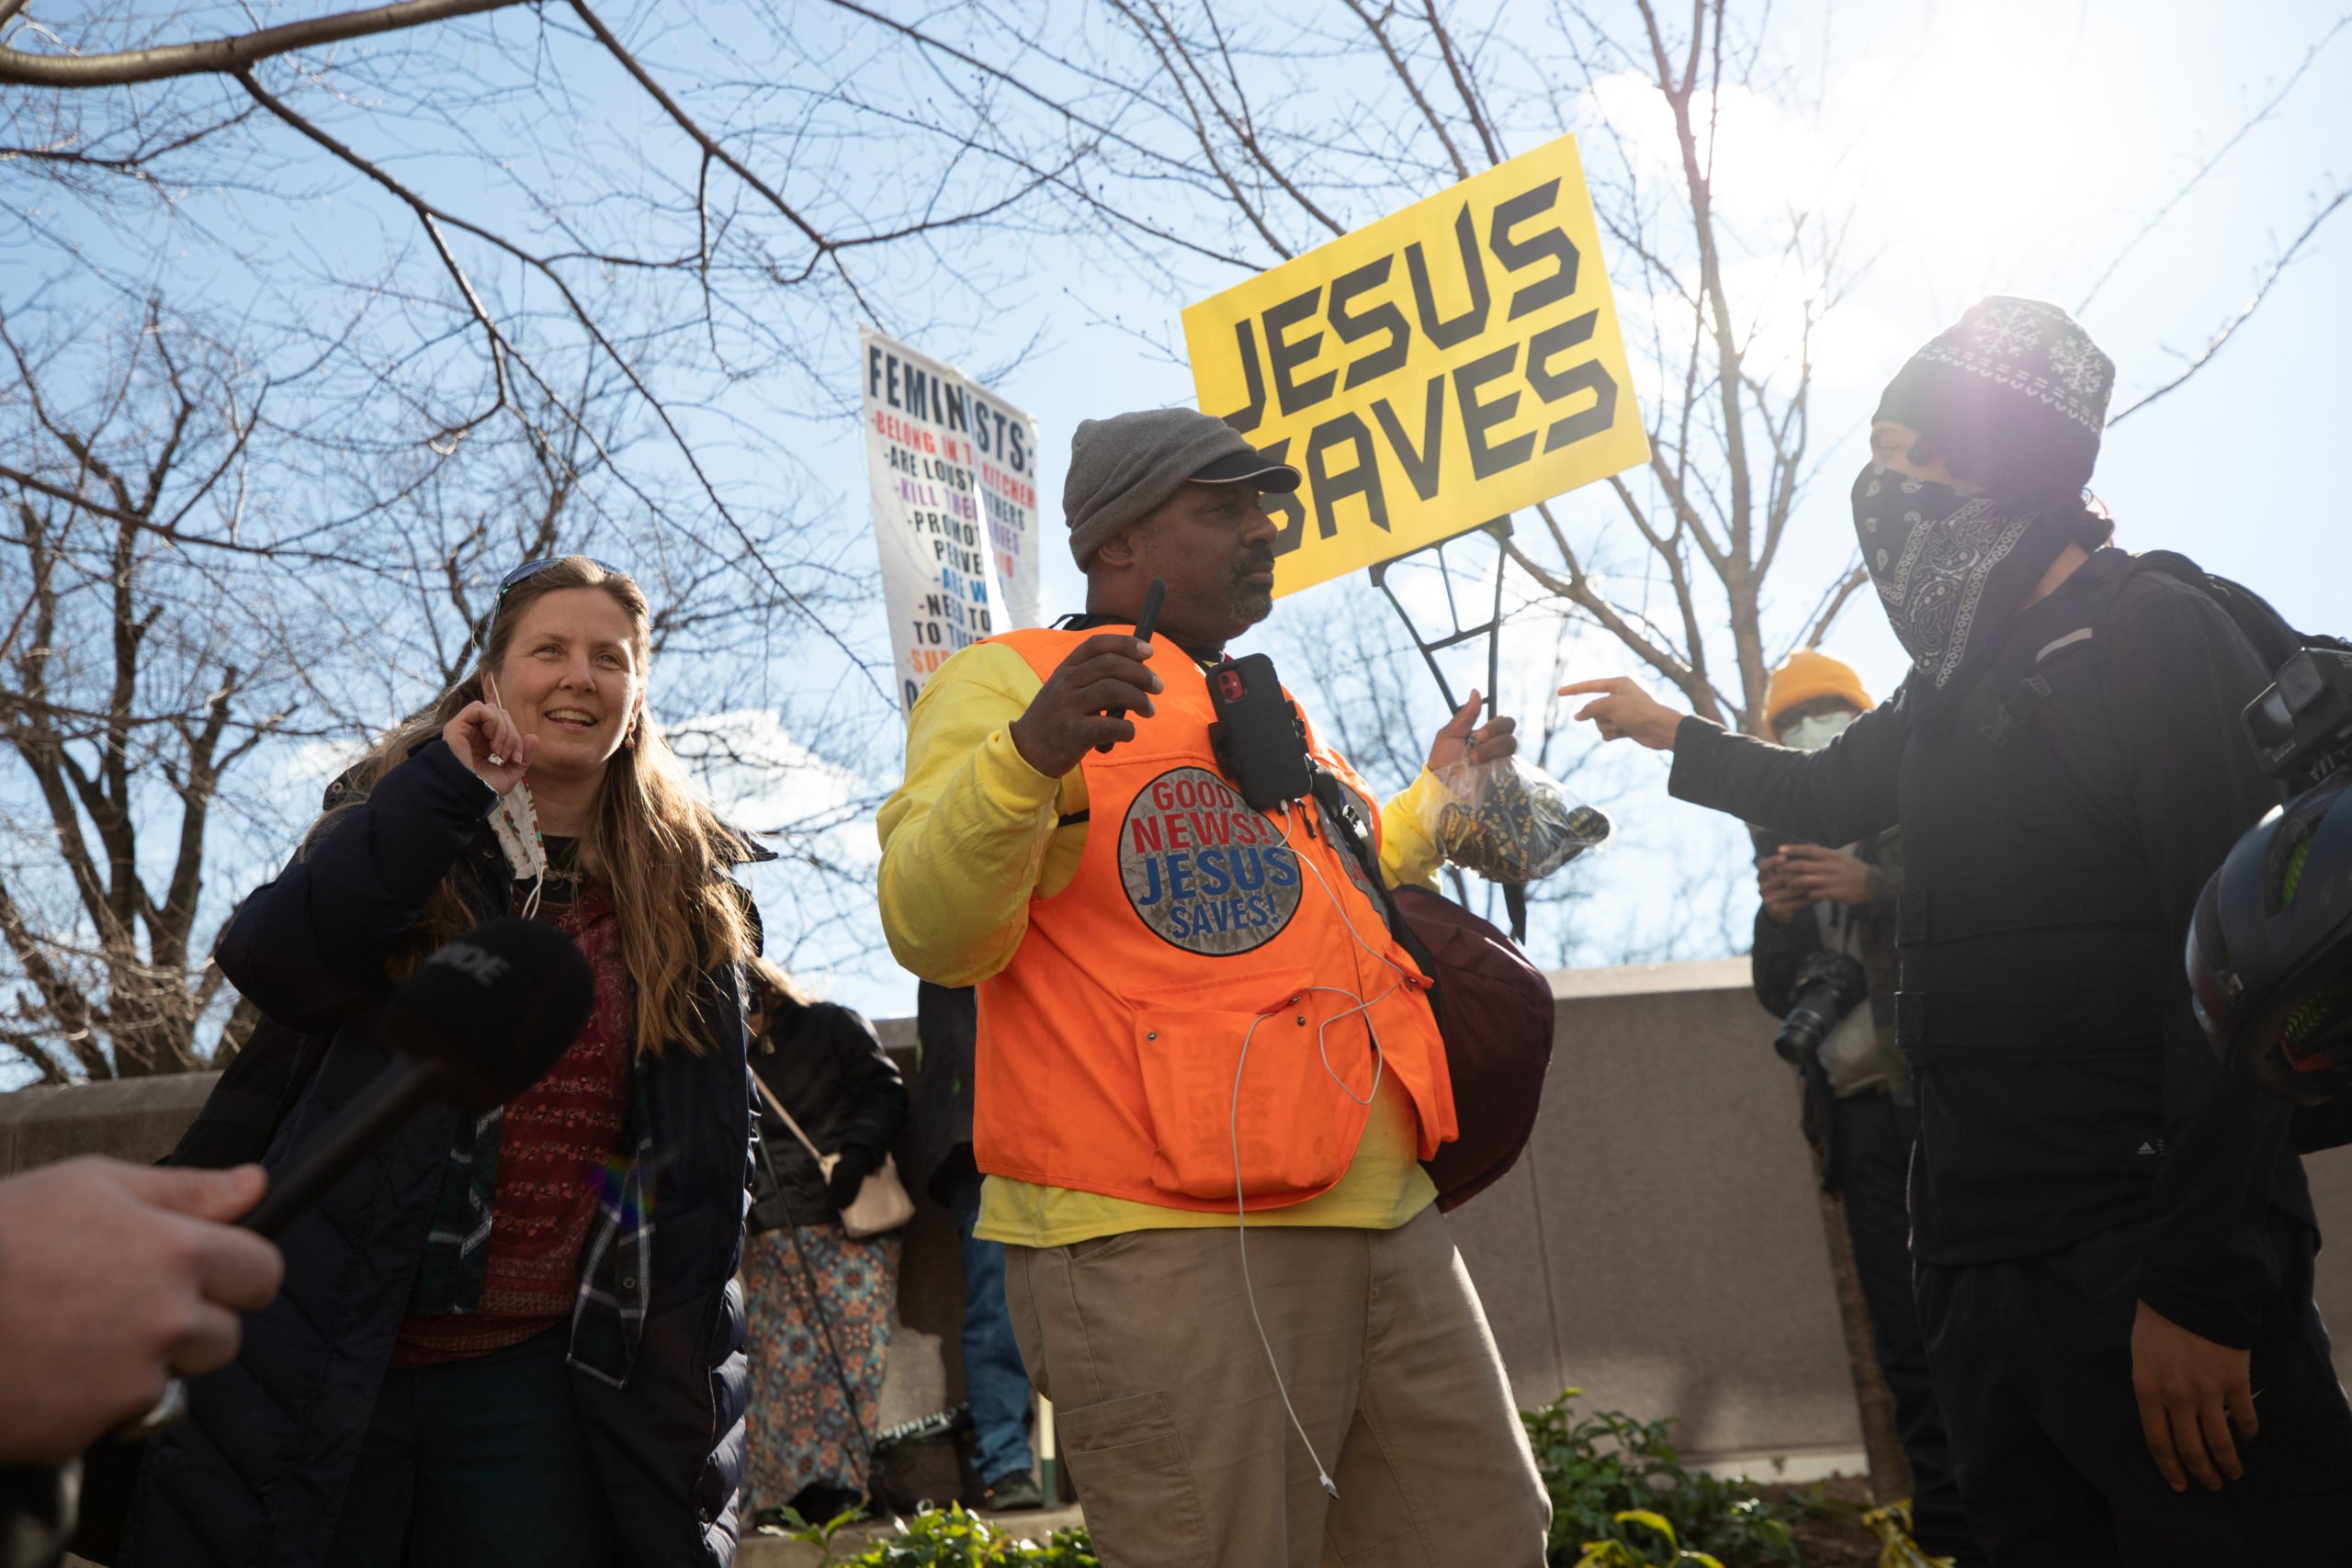 Several religious demonstrators gathered near Union Station in Washington, D.C. on Jan. 20, 2021. (Kaylee Greenlee - Daily Caller News Foundation)